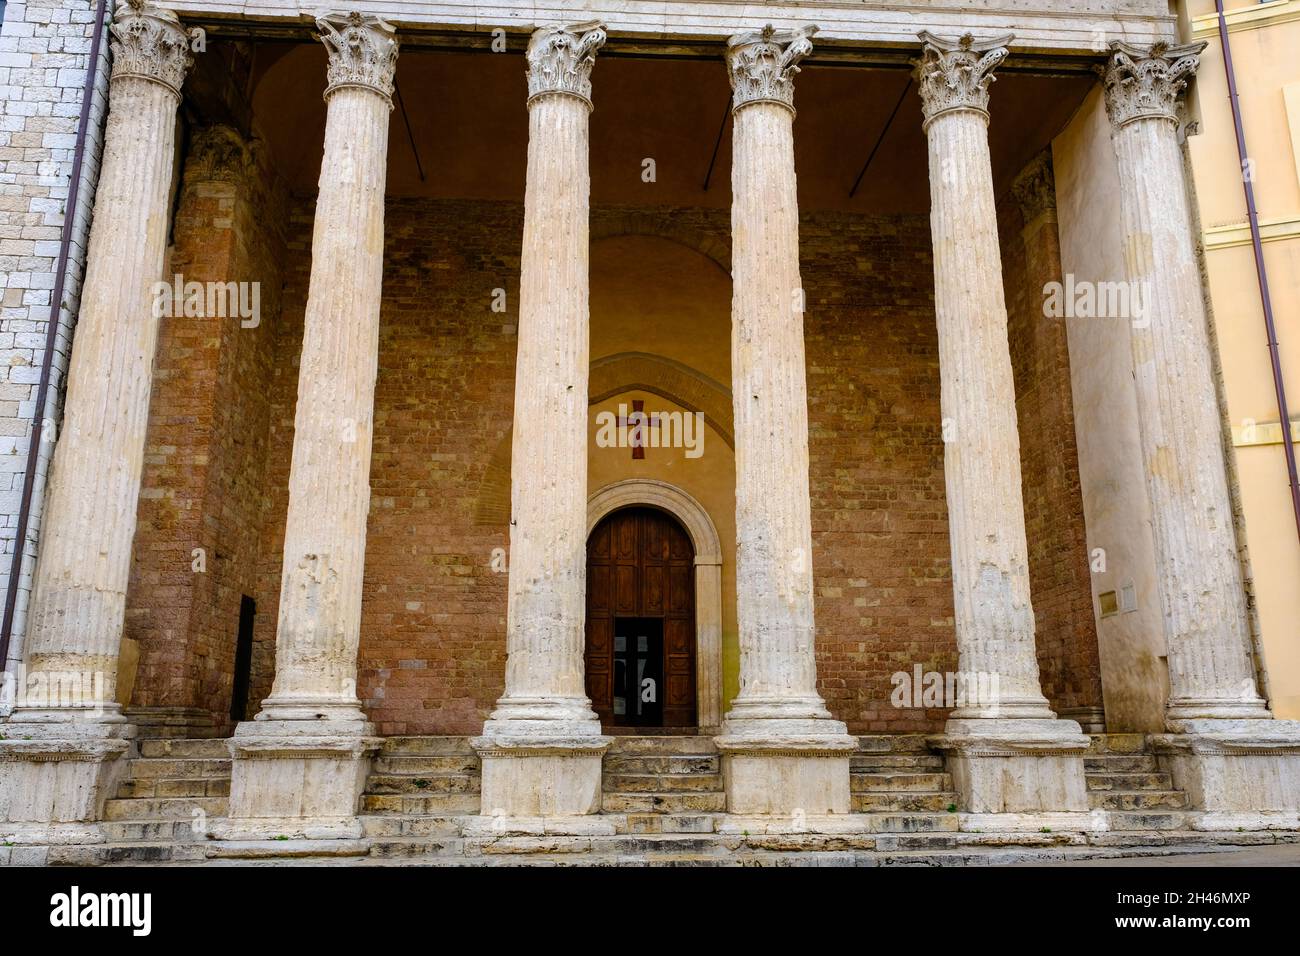 Corinthian columns standing at the entrance of Santa Maria sopra Minerva also known as the Temple of Minerva in Assisi Italy Stock Photo